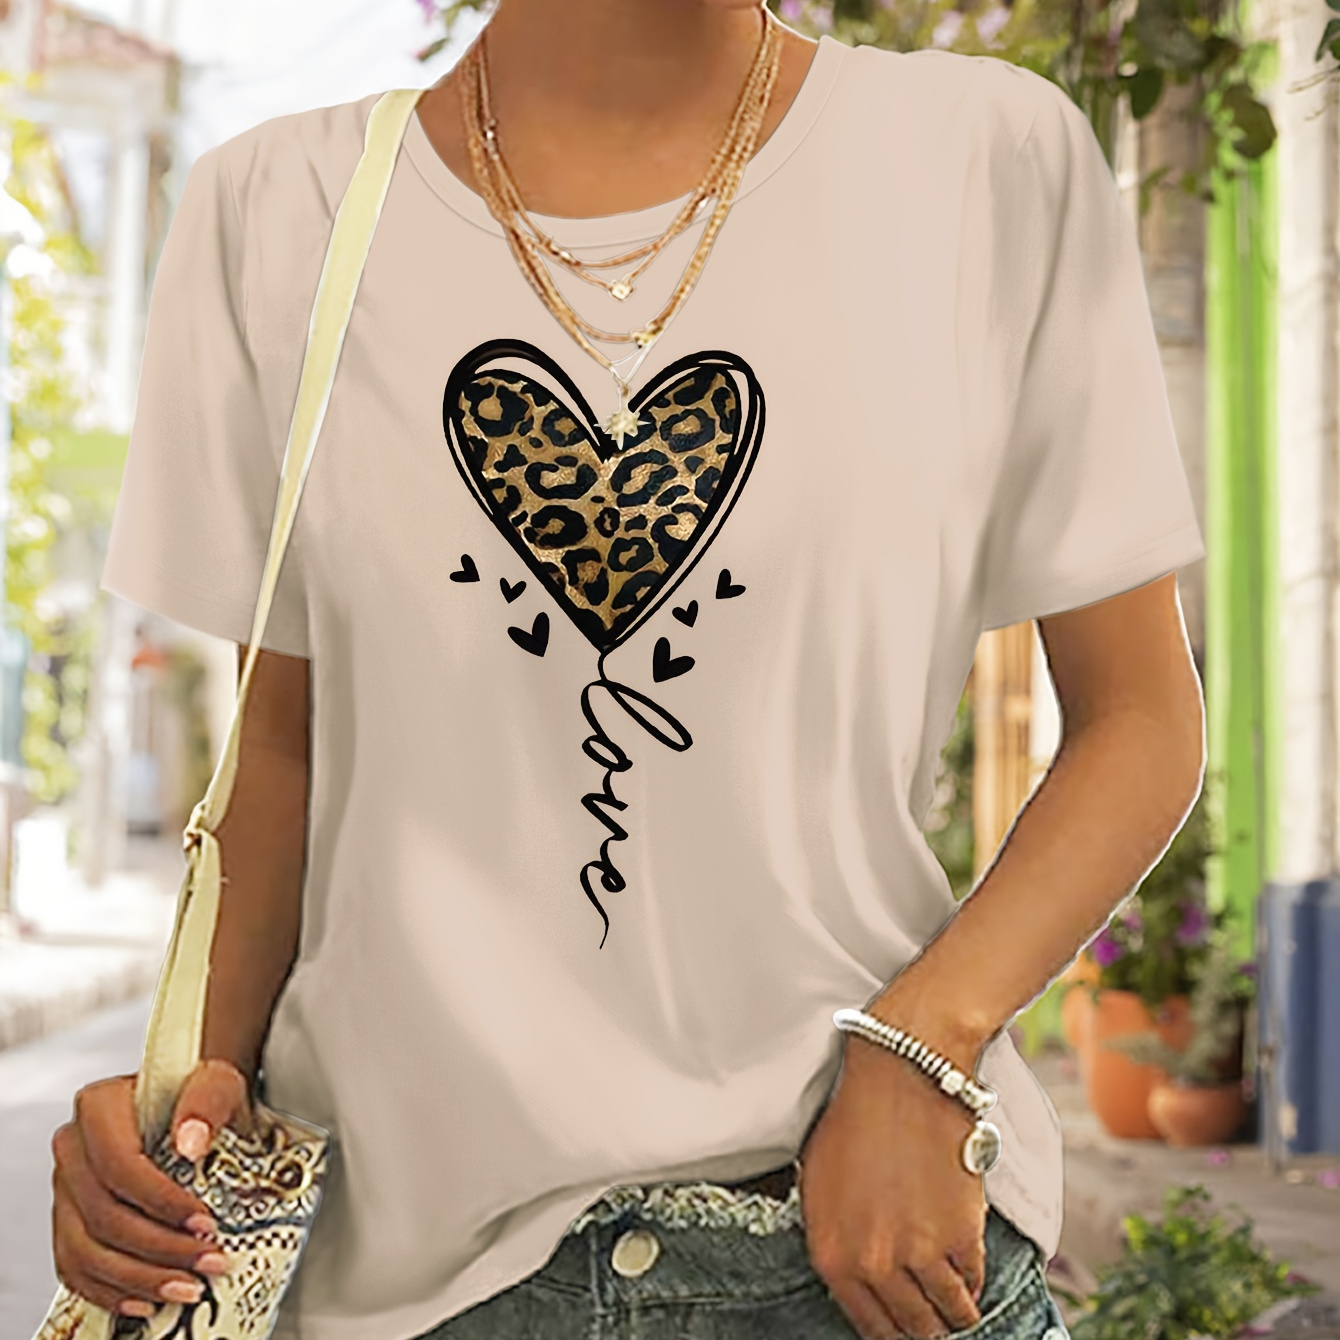 

Leopard Heart Graphic Print T-shirt, Short Sleeve Crew Neck Casual Top For Summer & Spring, Women's Clothing